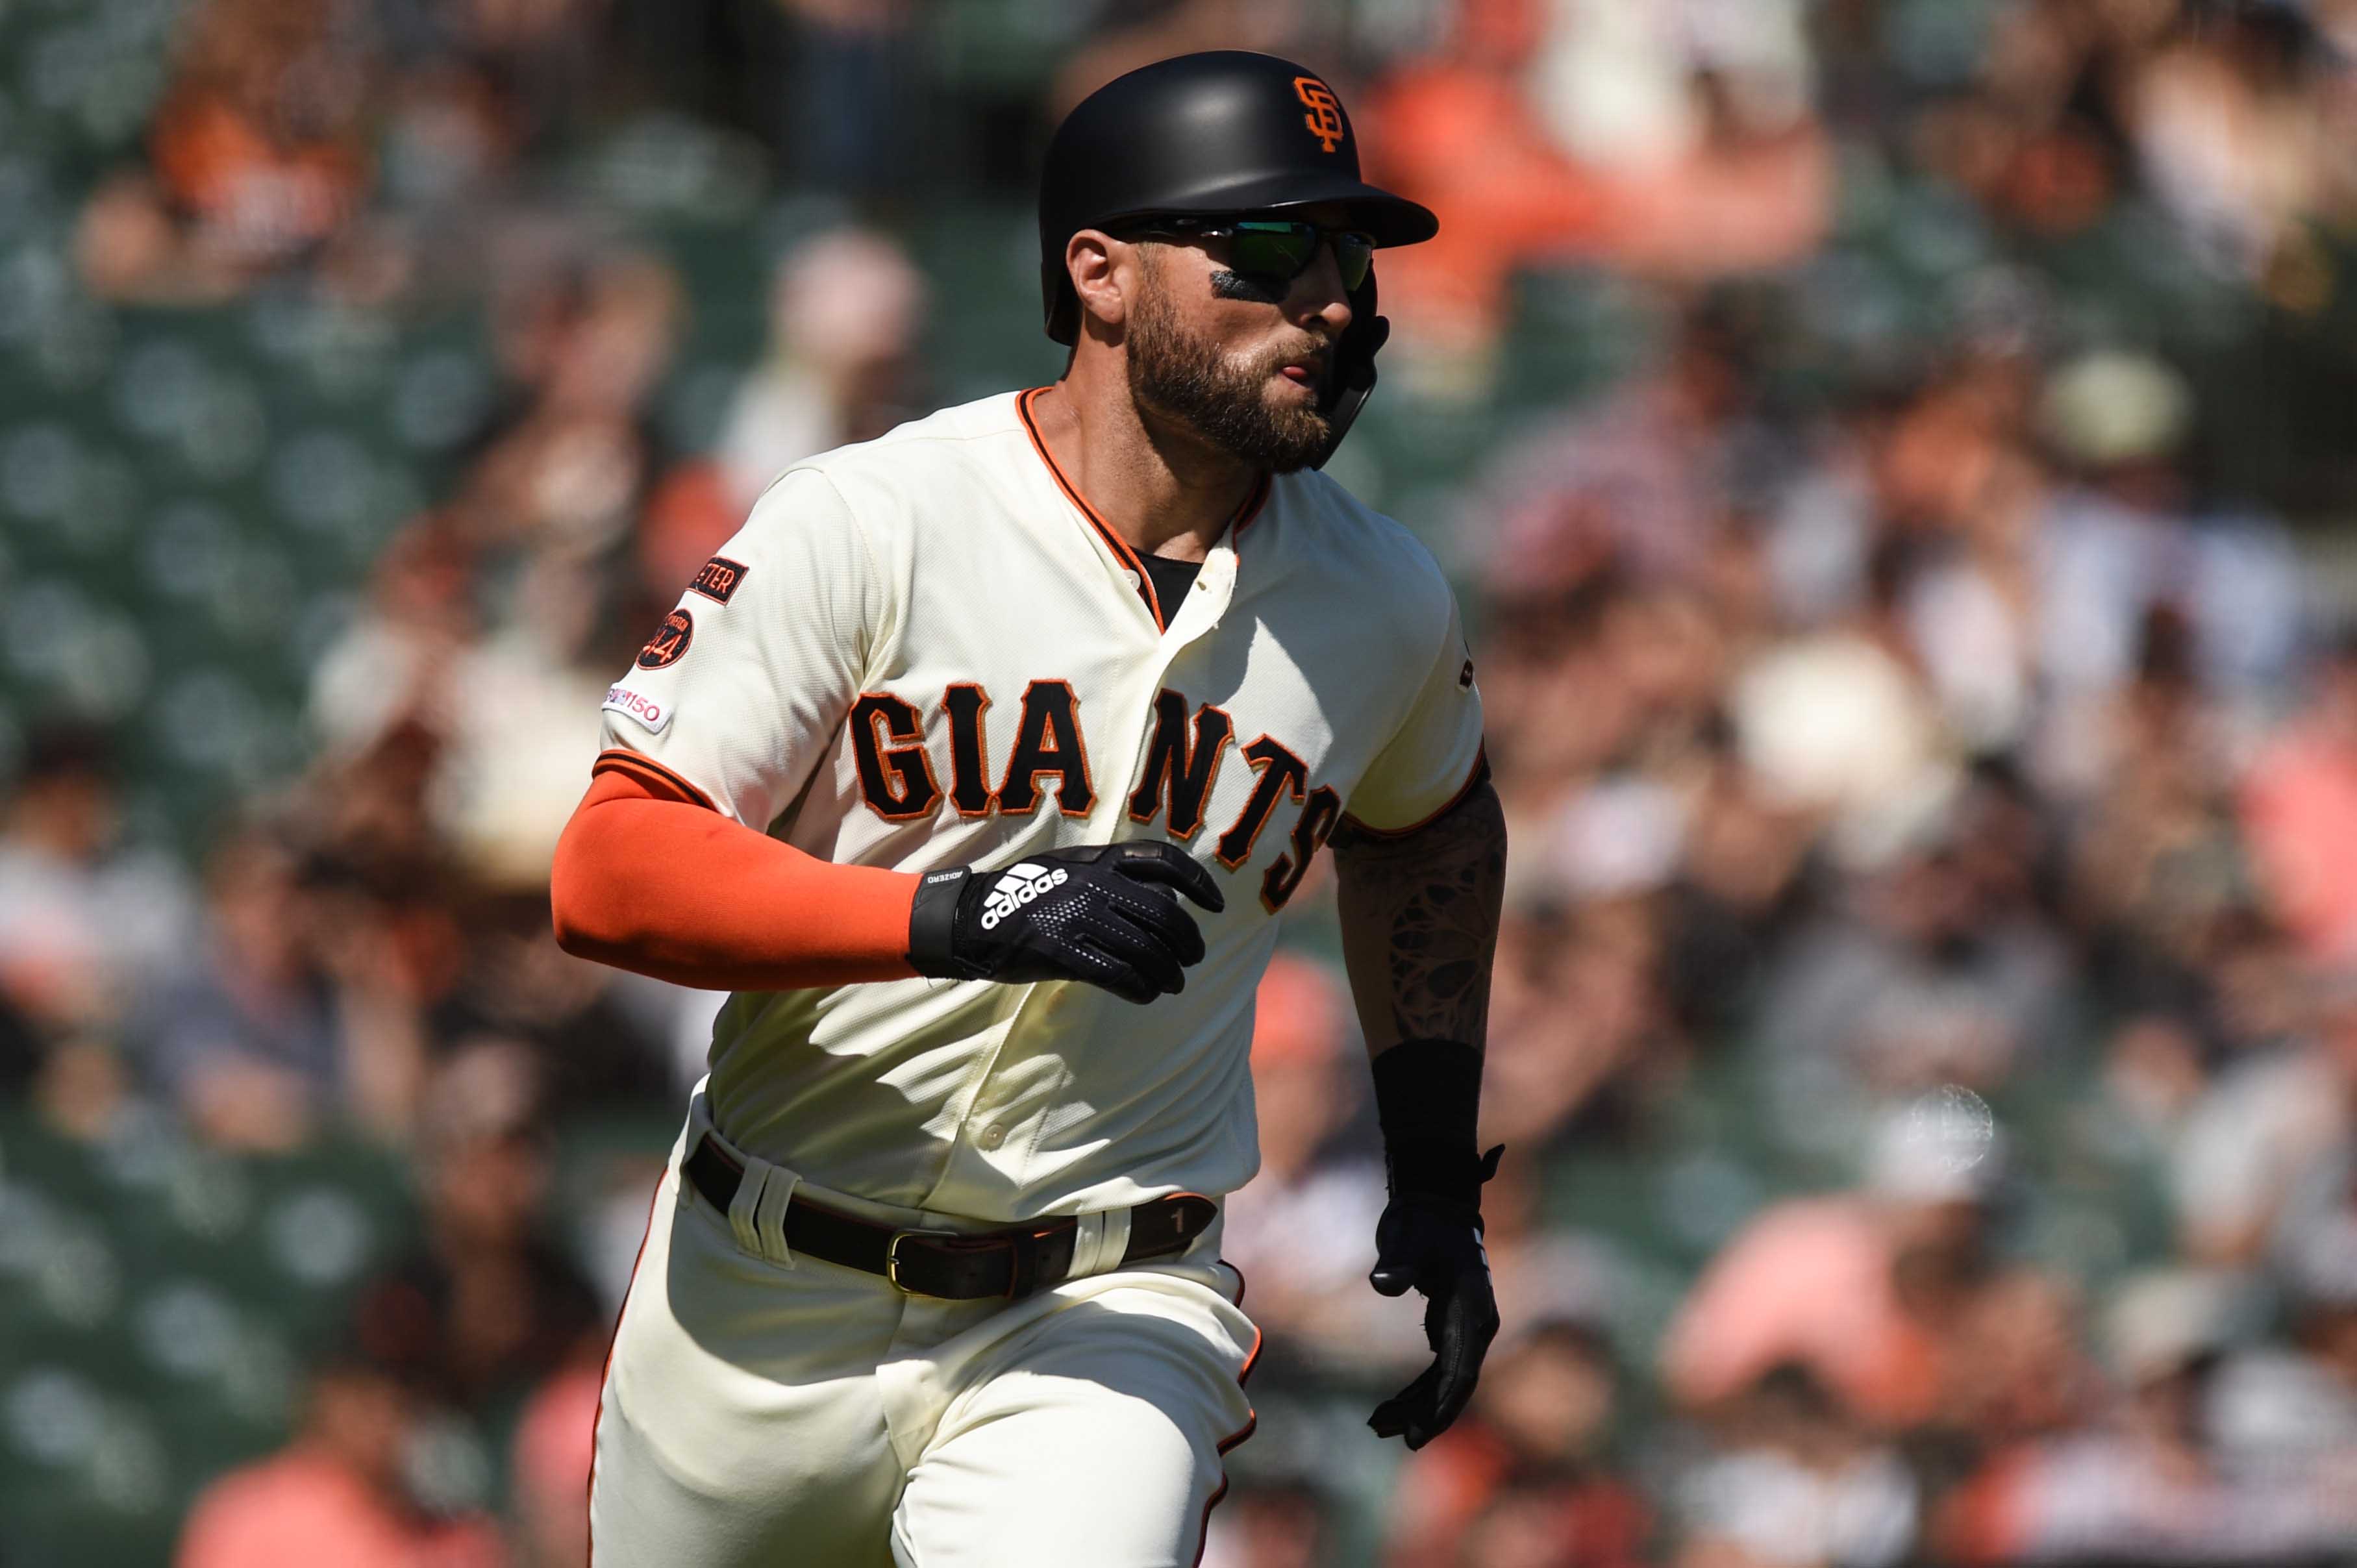 SF Giants center fielder Kevin Pillar runs to first base after hitting an RBI single against the Colorado Rockies in the first inning at Oracle Park. (2019)